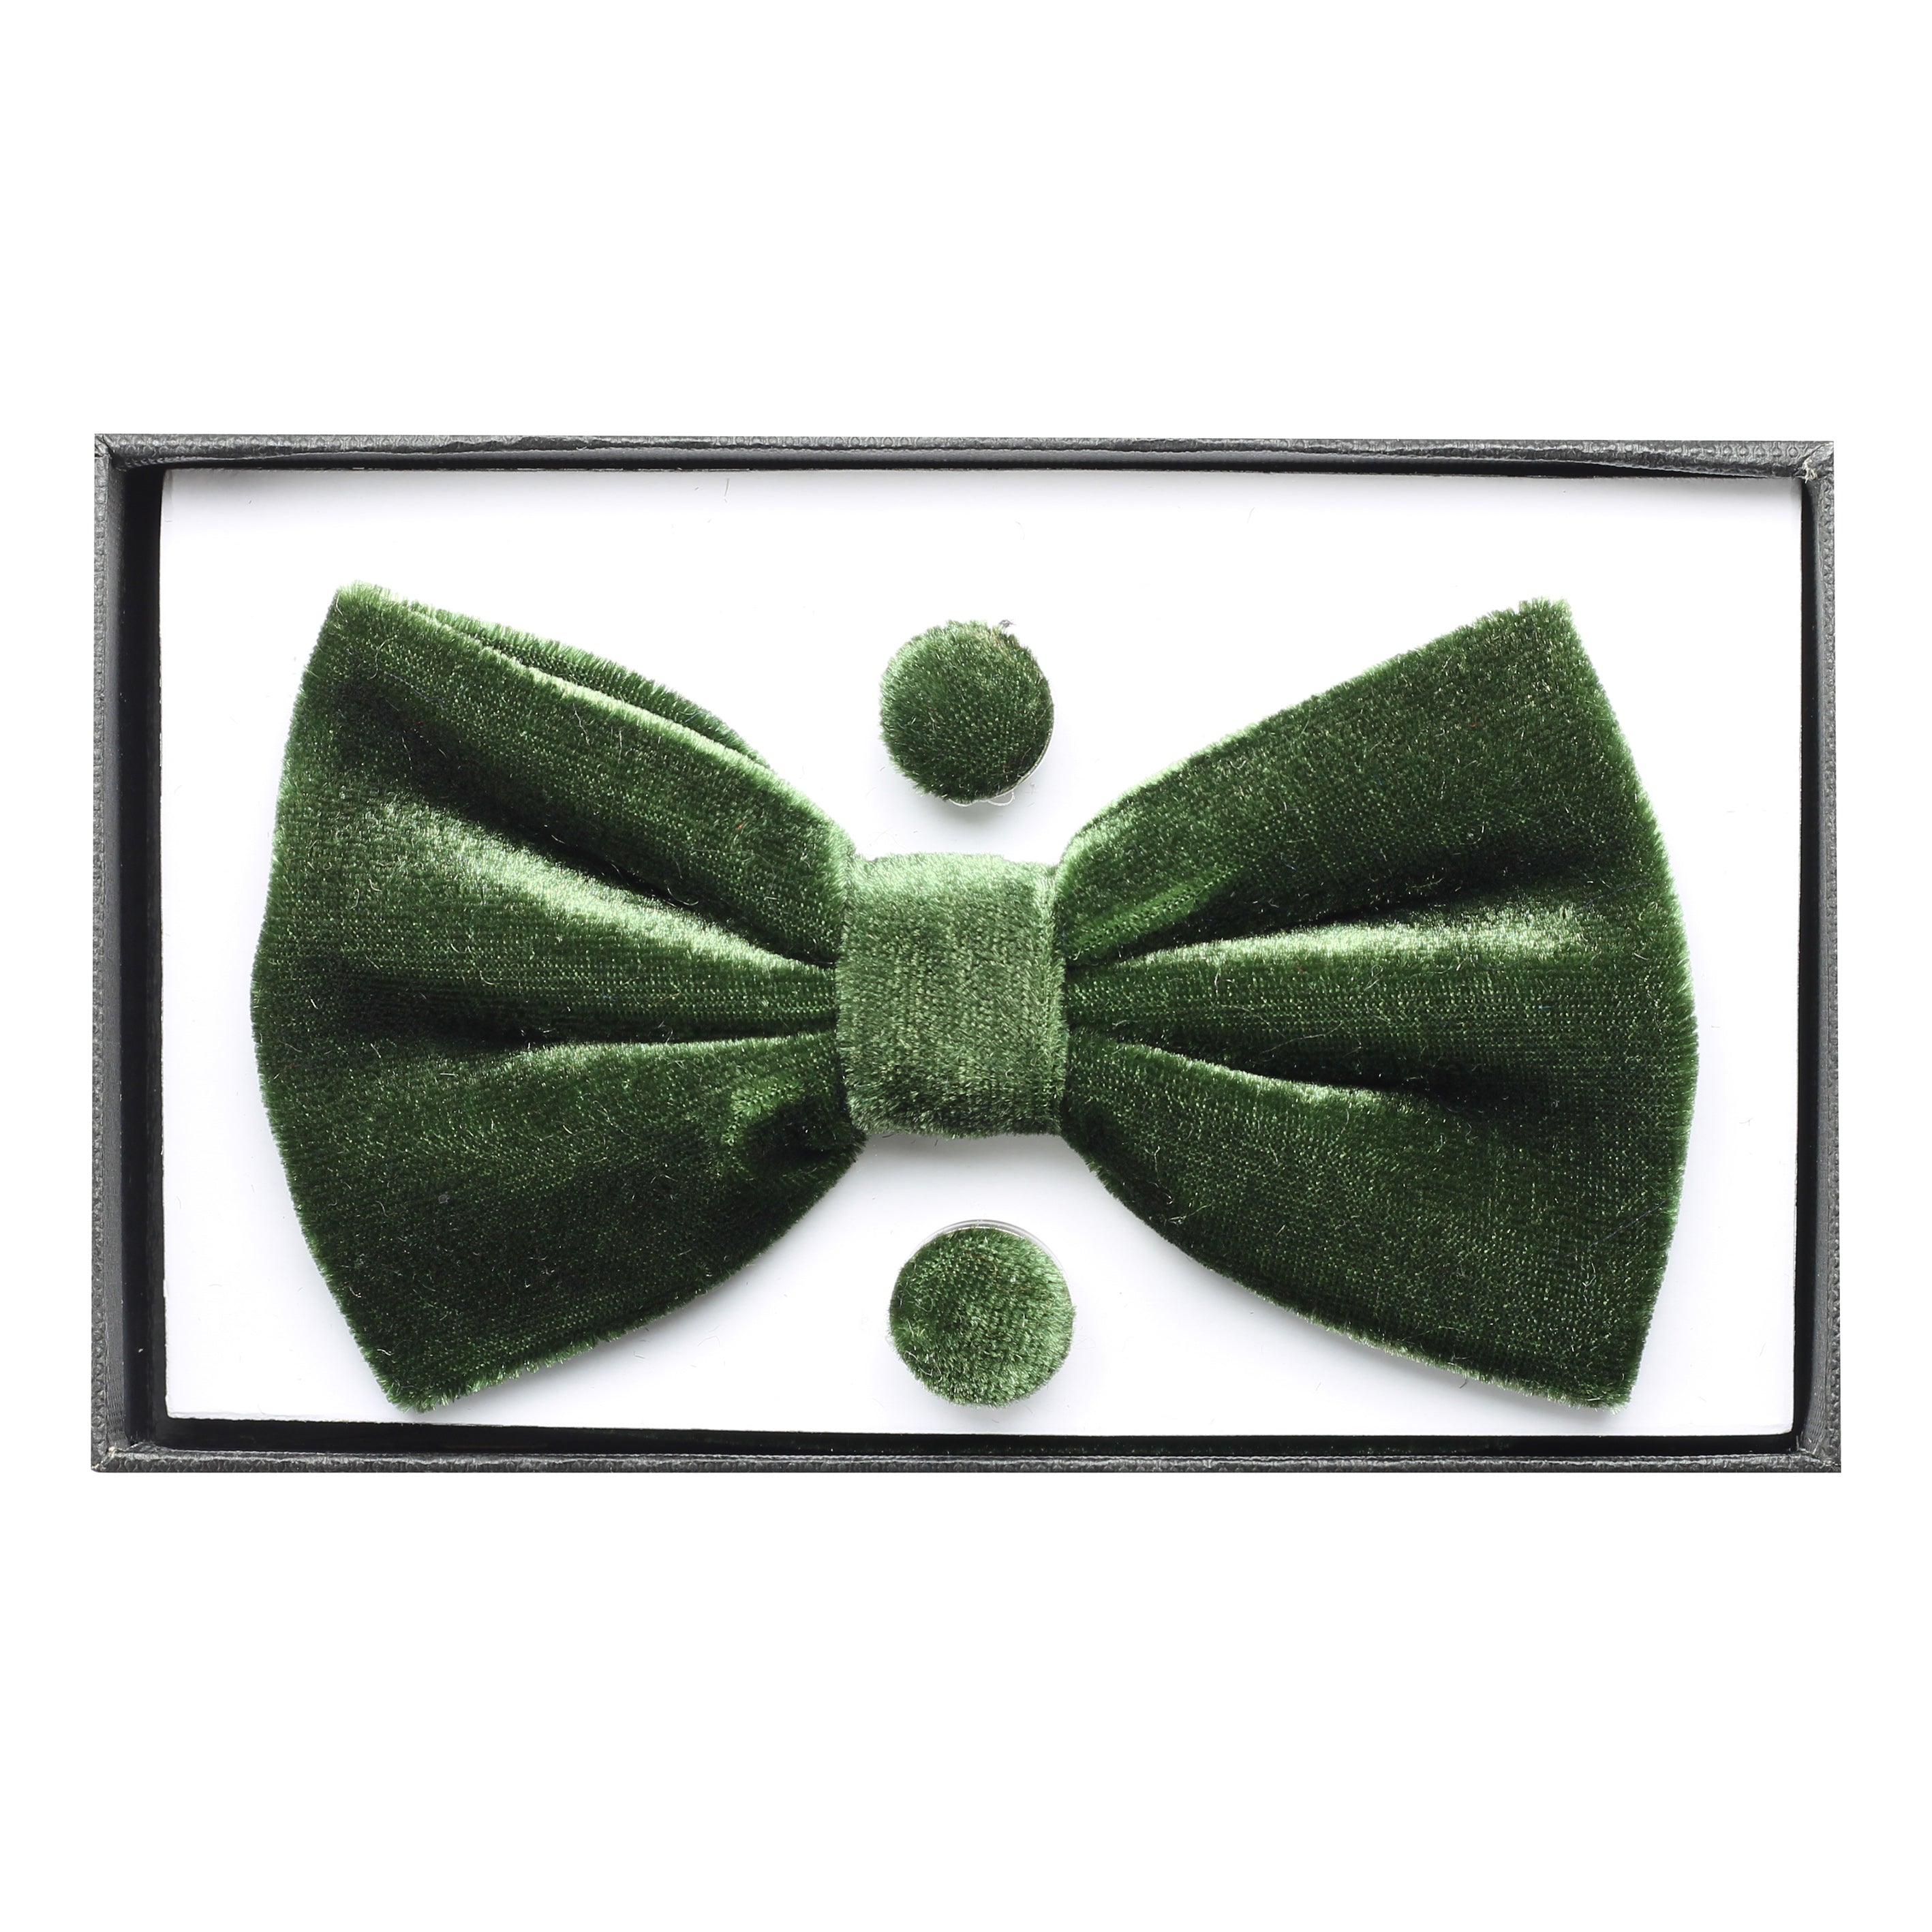 Green Shiny Velvet Bow Tie With Cufflink Pocket Square